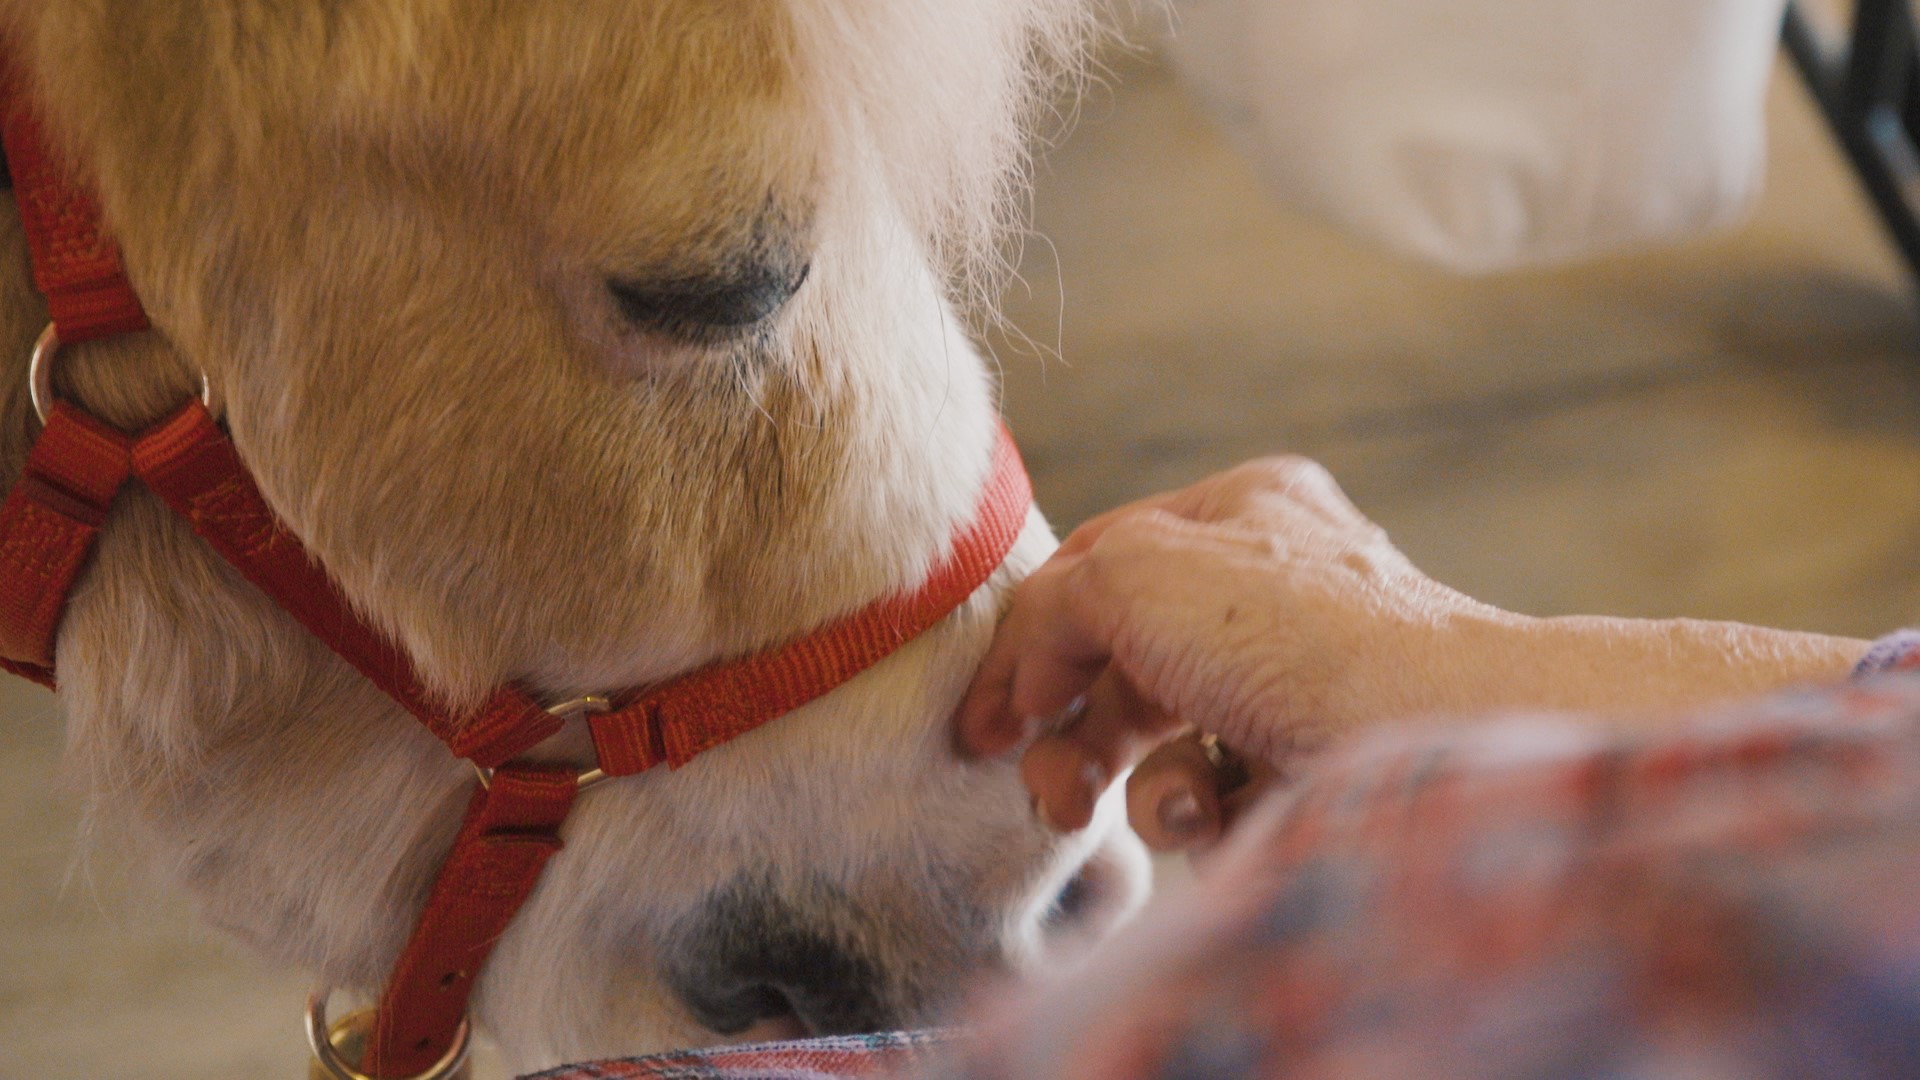 Big Daddy, the mini horse, brings joy to nursing home patients